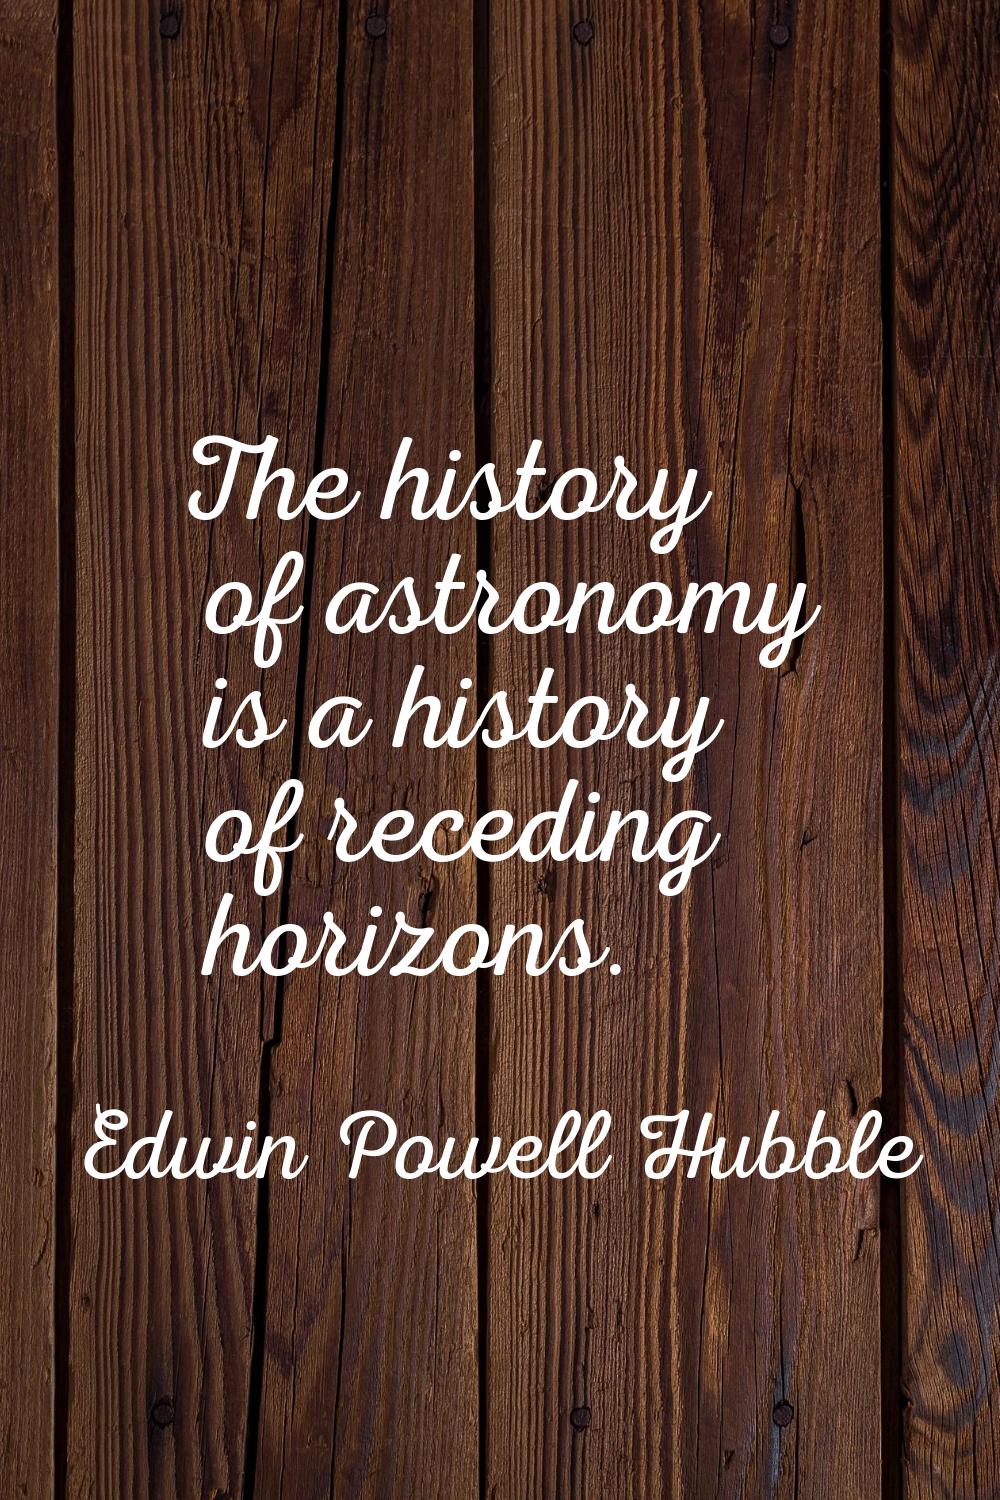 The history of astronomy is a history of receding horizons.